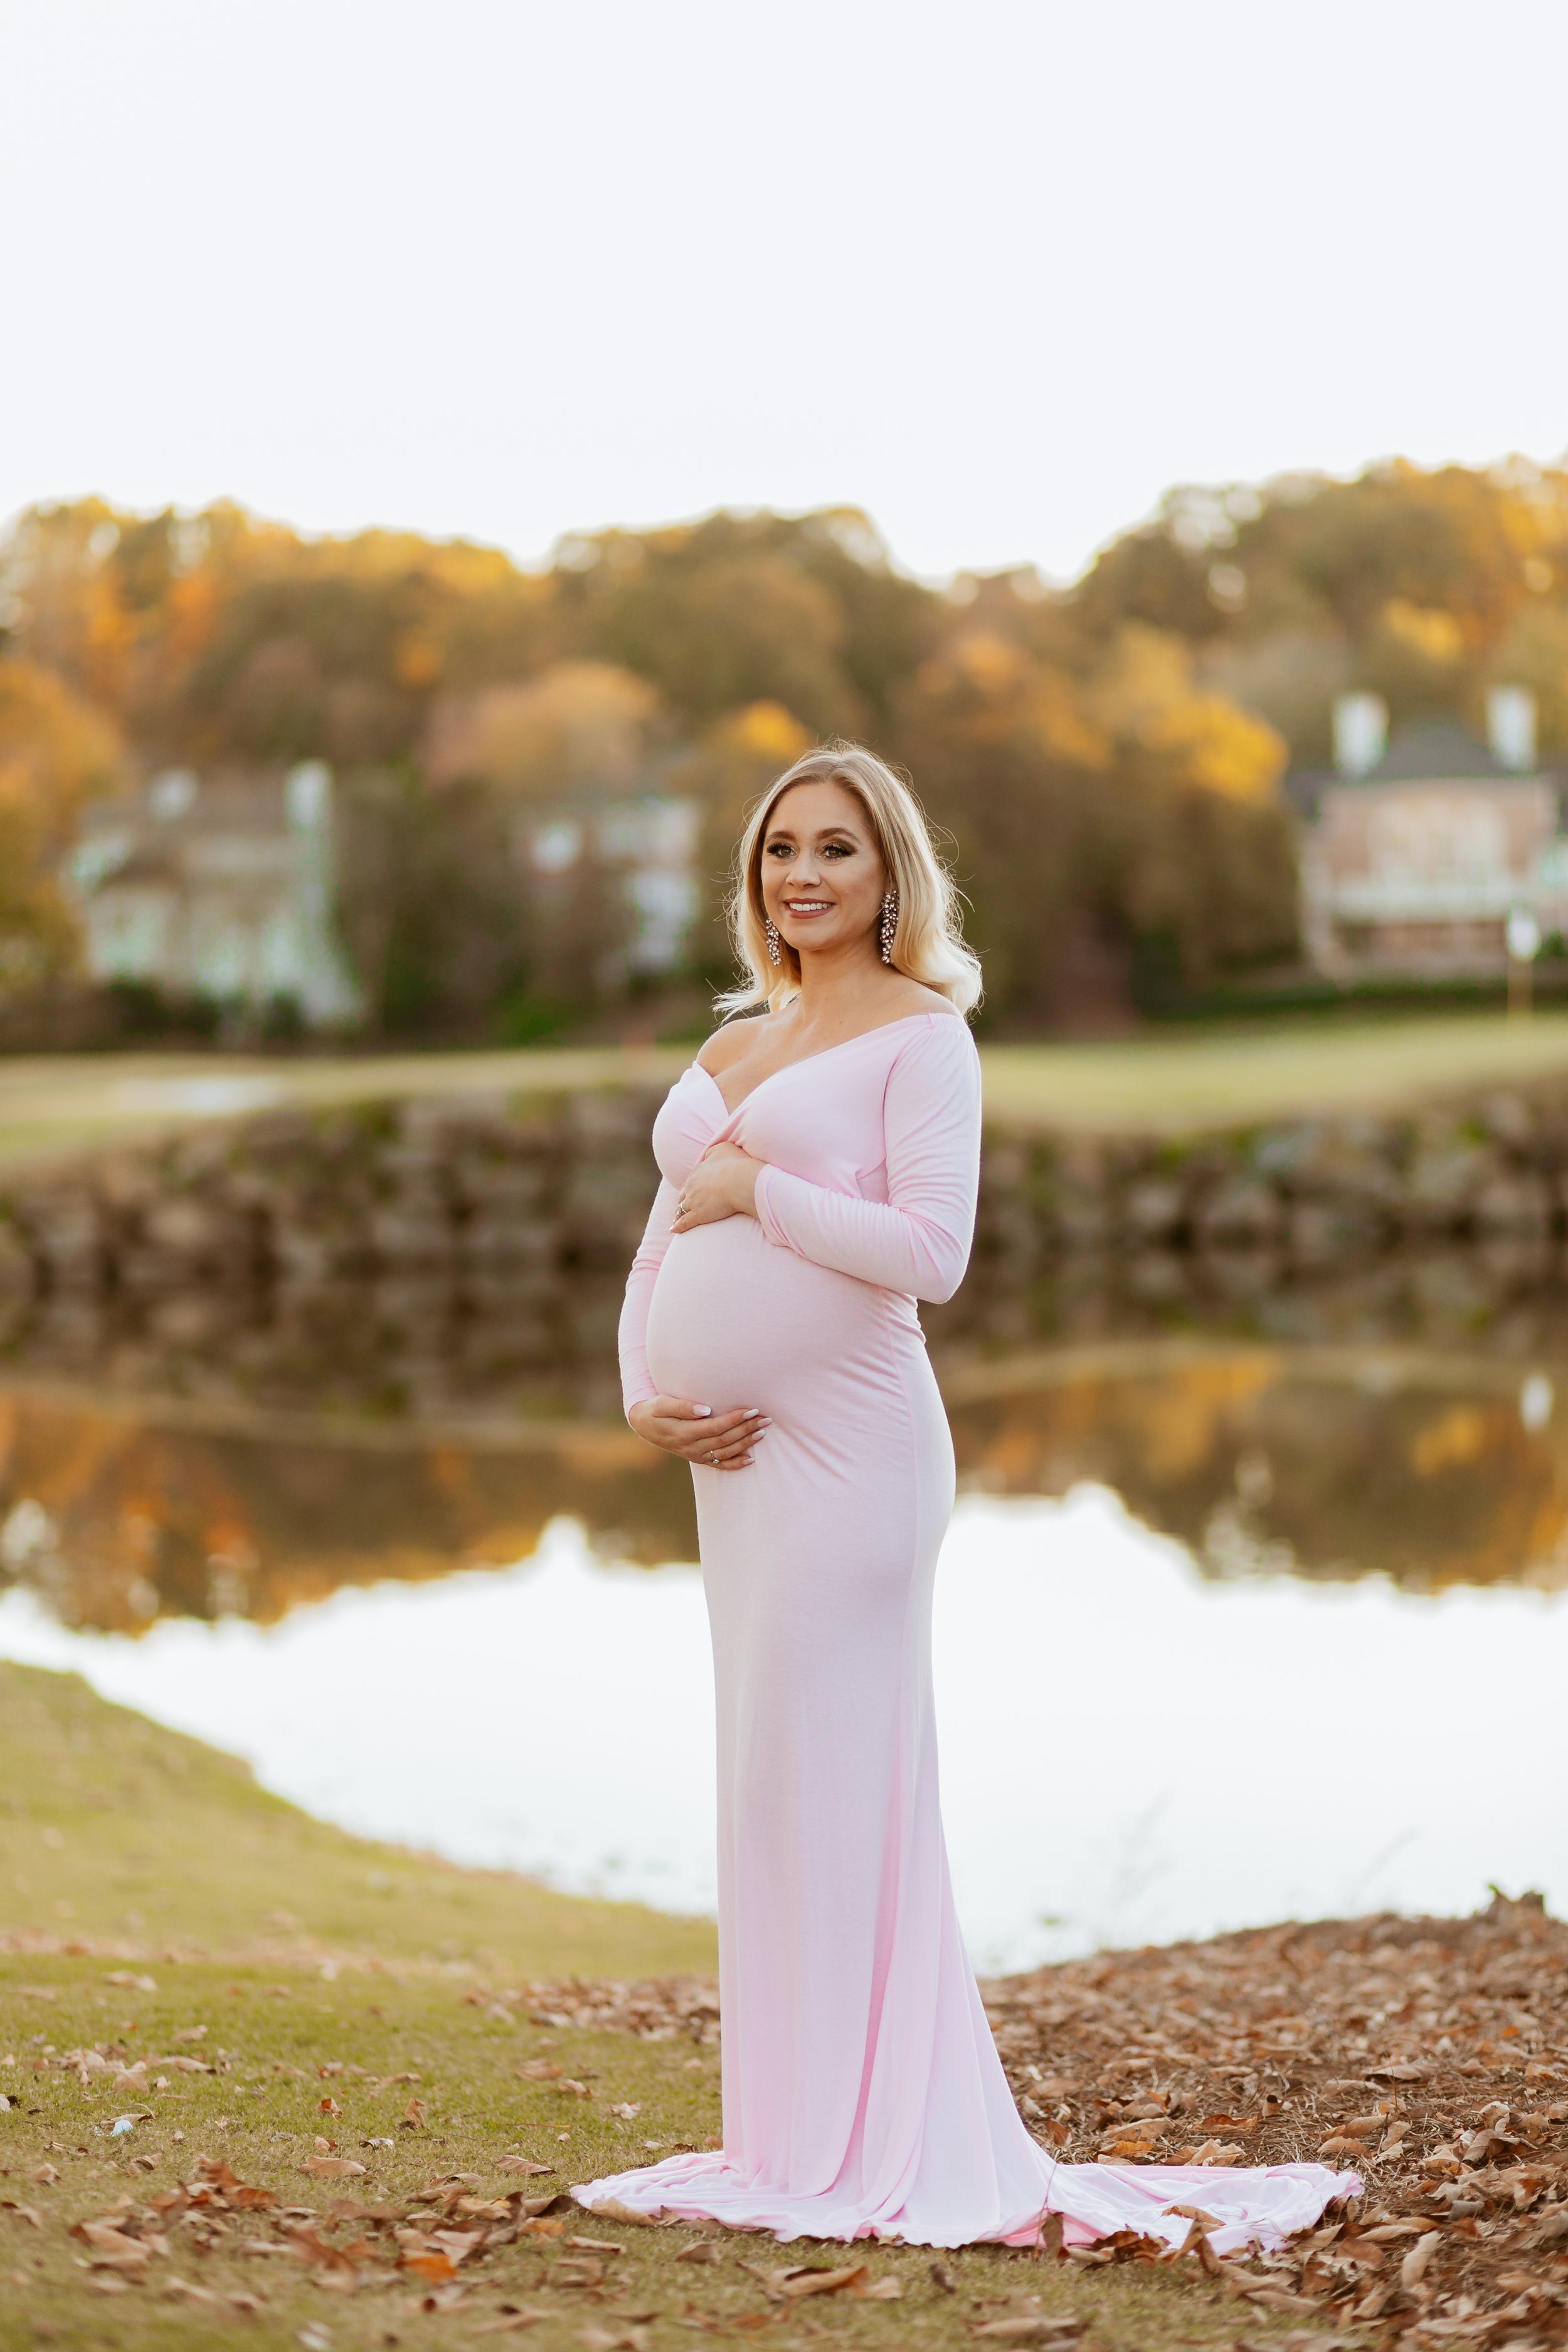 Blog Maternity Photoshoot Clothing Styles to Capture the Glow - Charlotte  Maternity and Family Photographer